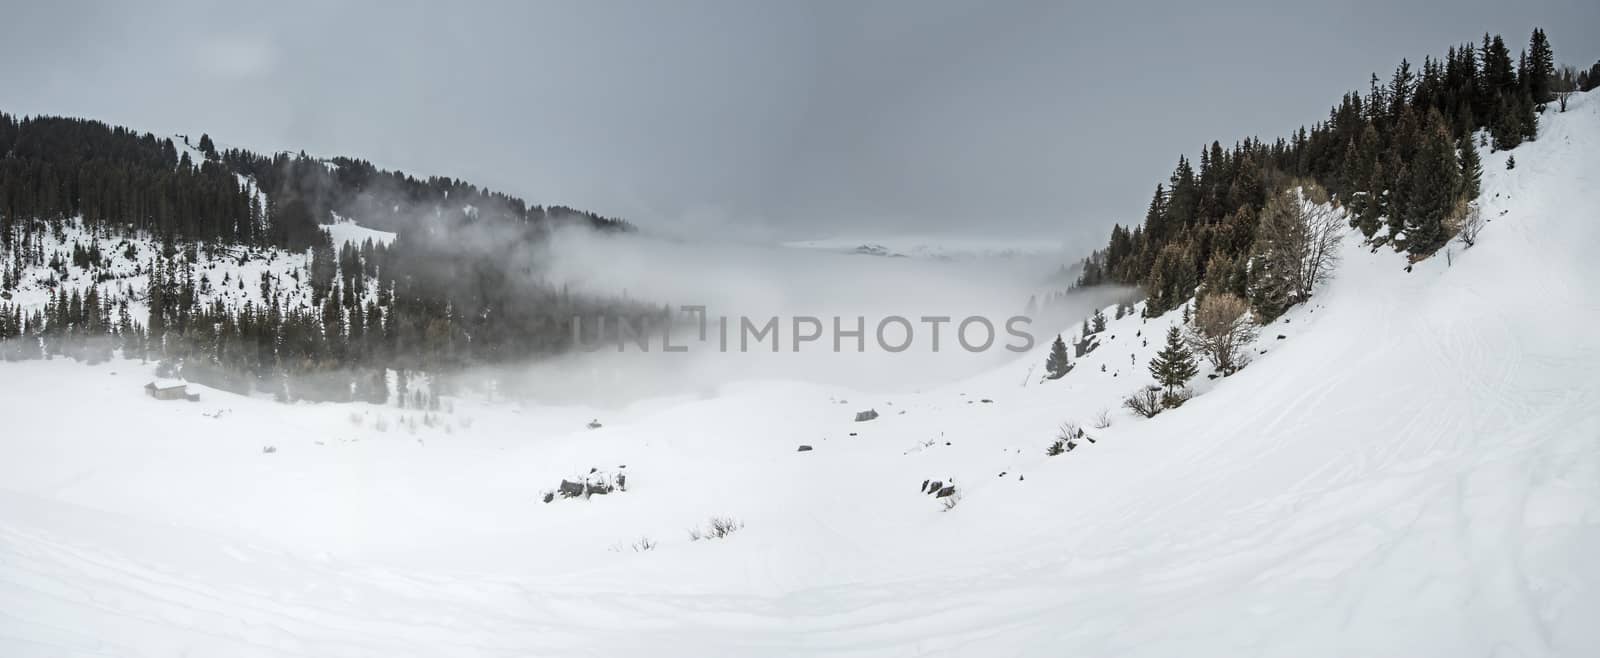 Panoramic view of a snow covered mountain range looking down valley with low clouds and an overcast sky